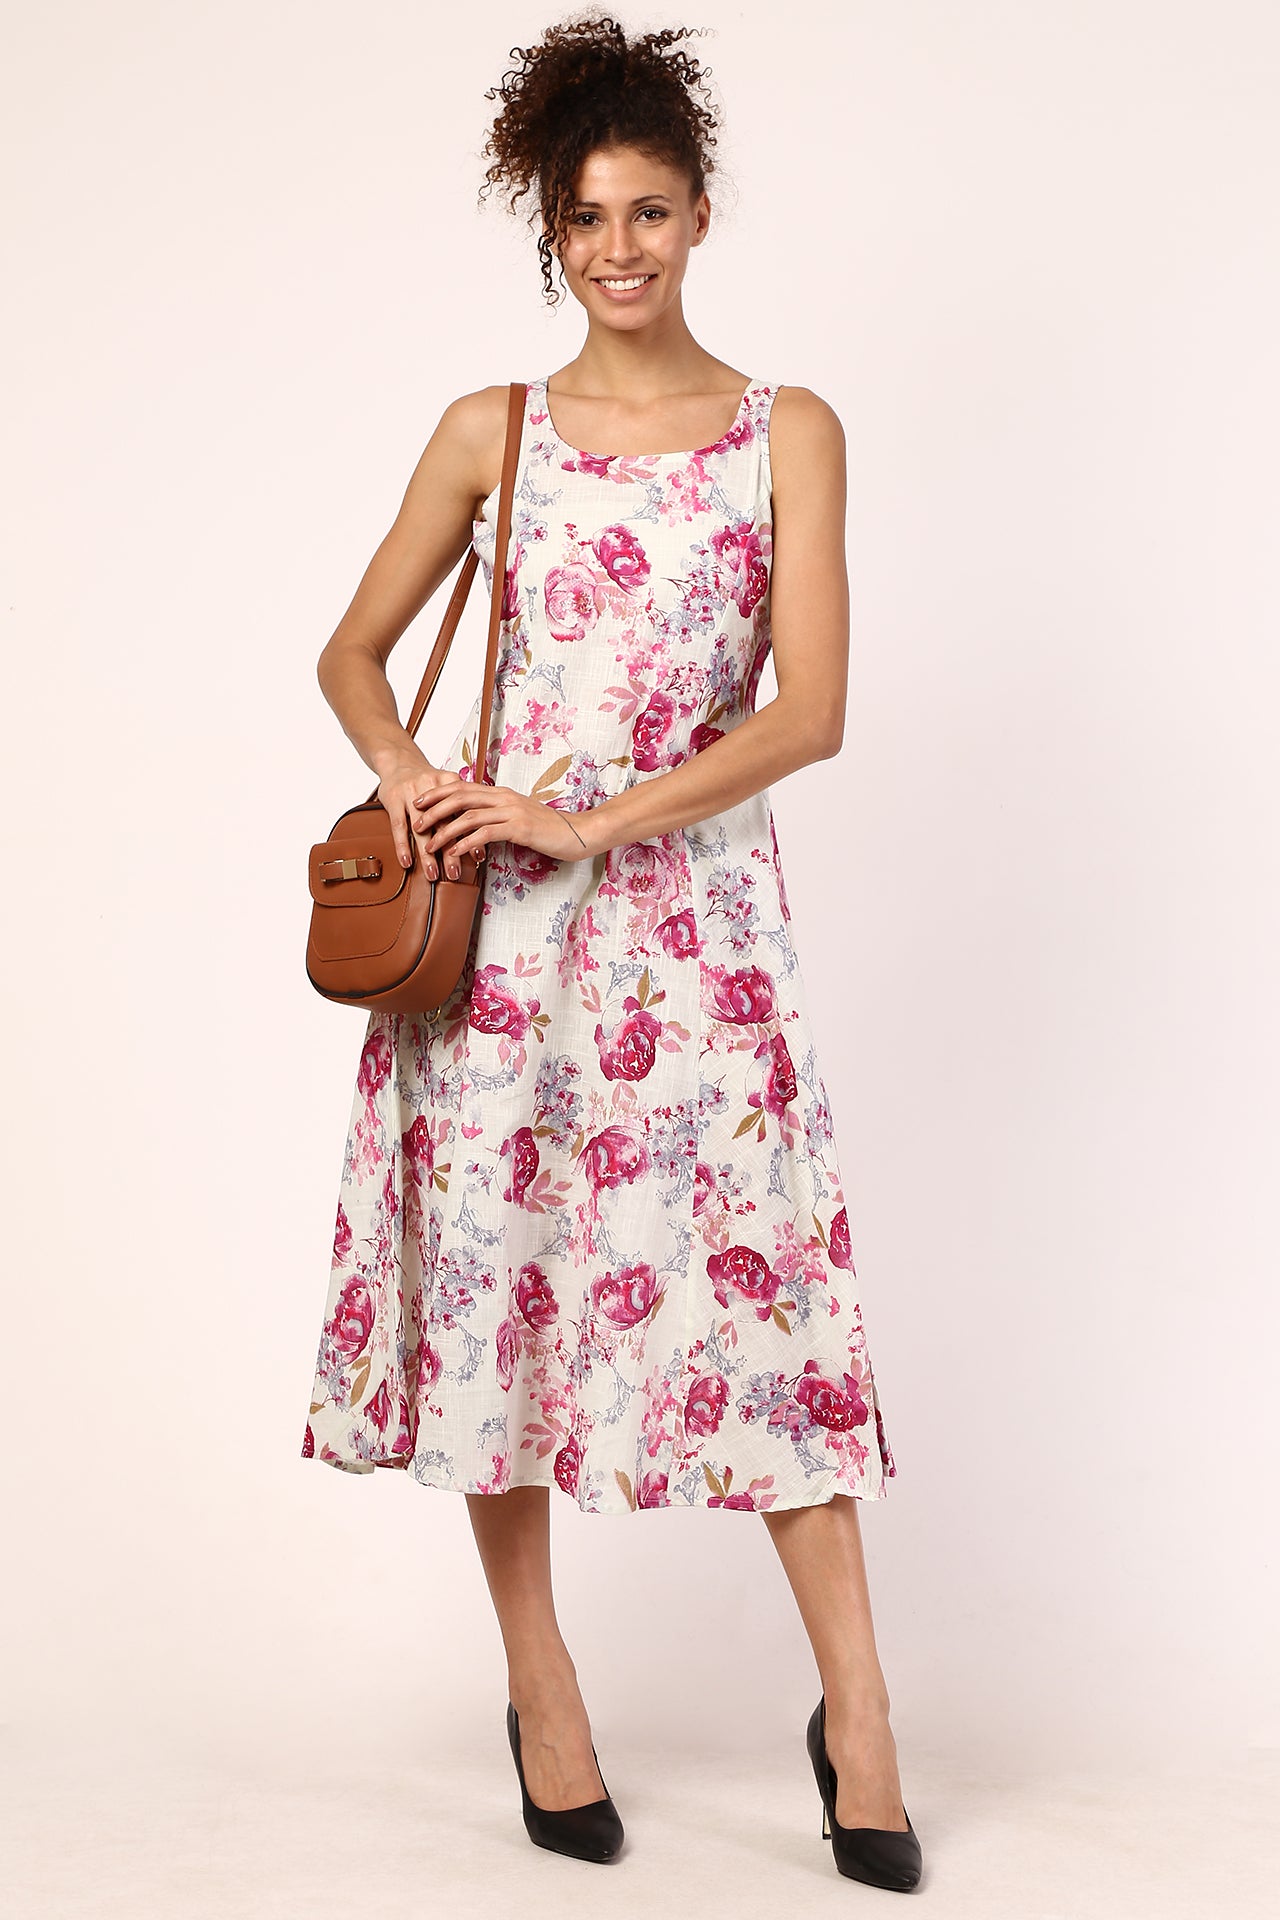 AMODINI OFF-WHITE AND PINK FLORAL COTTON ANKLE LENGTH DRESS